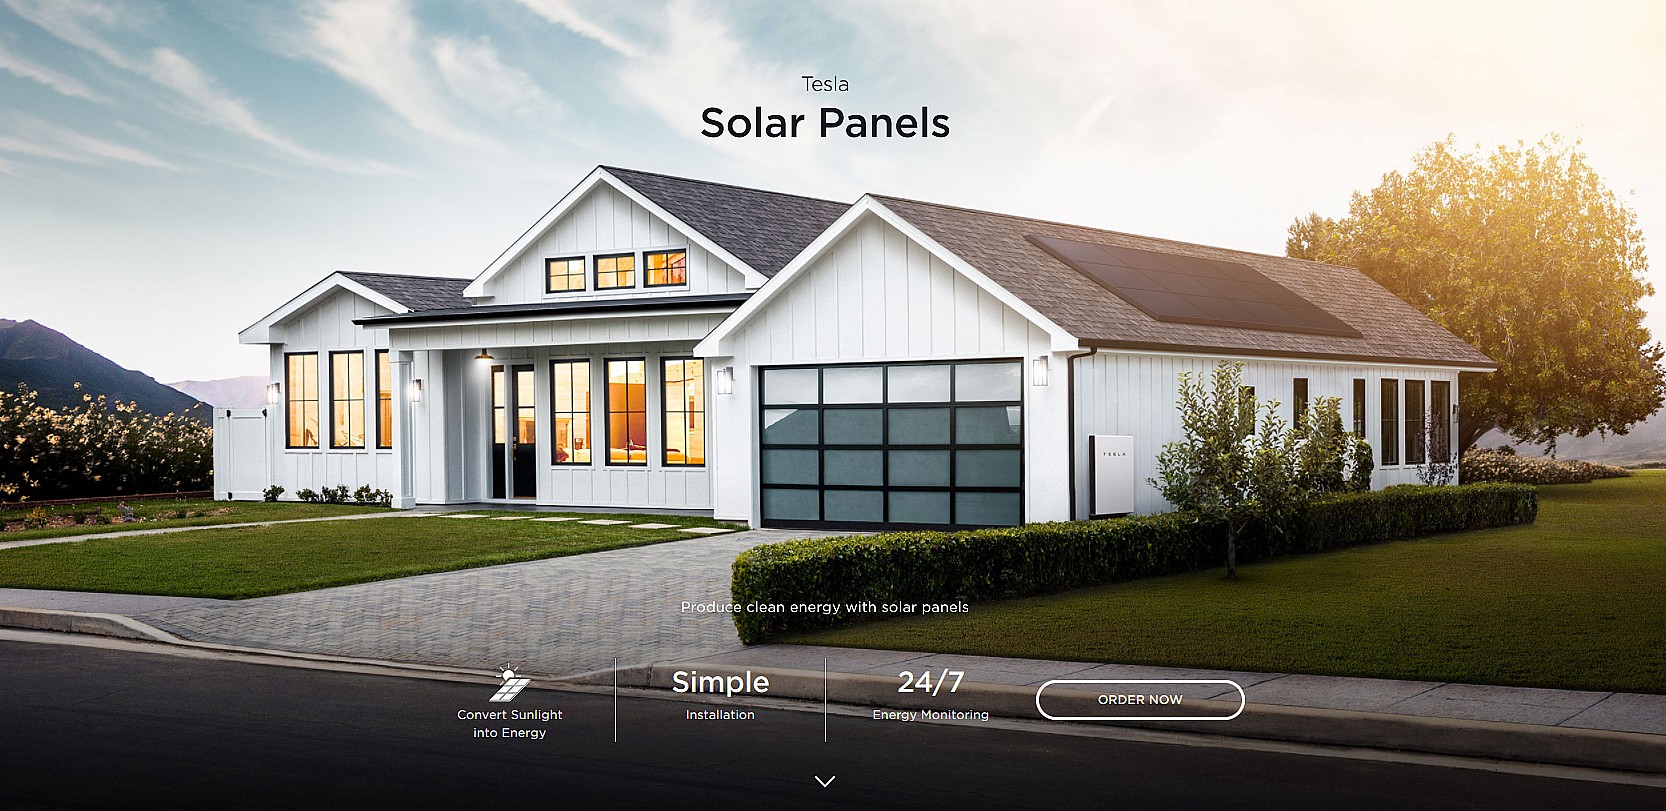 Tesla patent reveals Solar module aimed at faster, more attractive installations